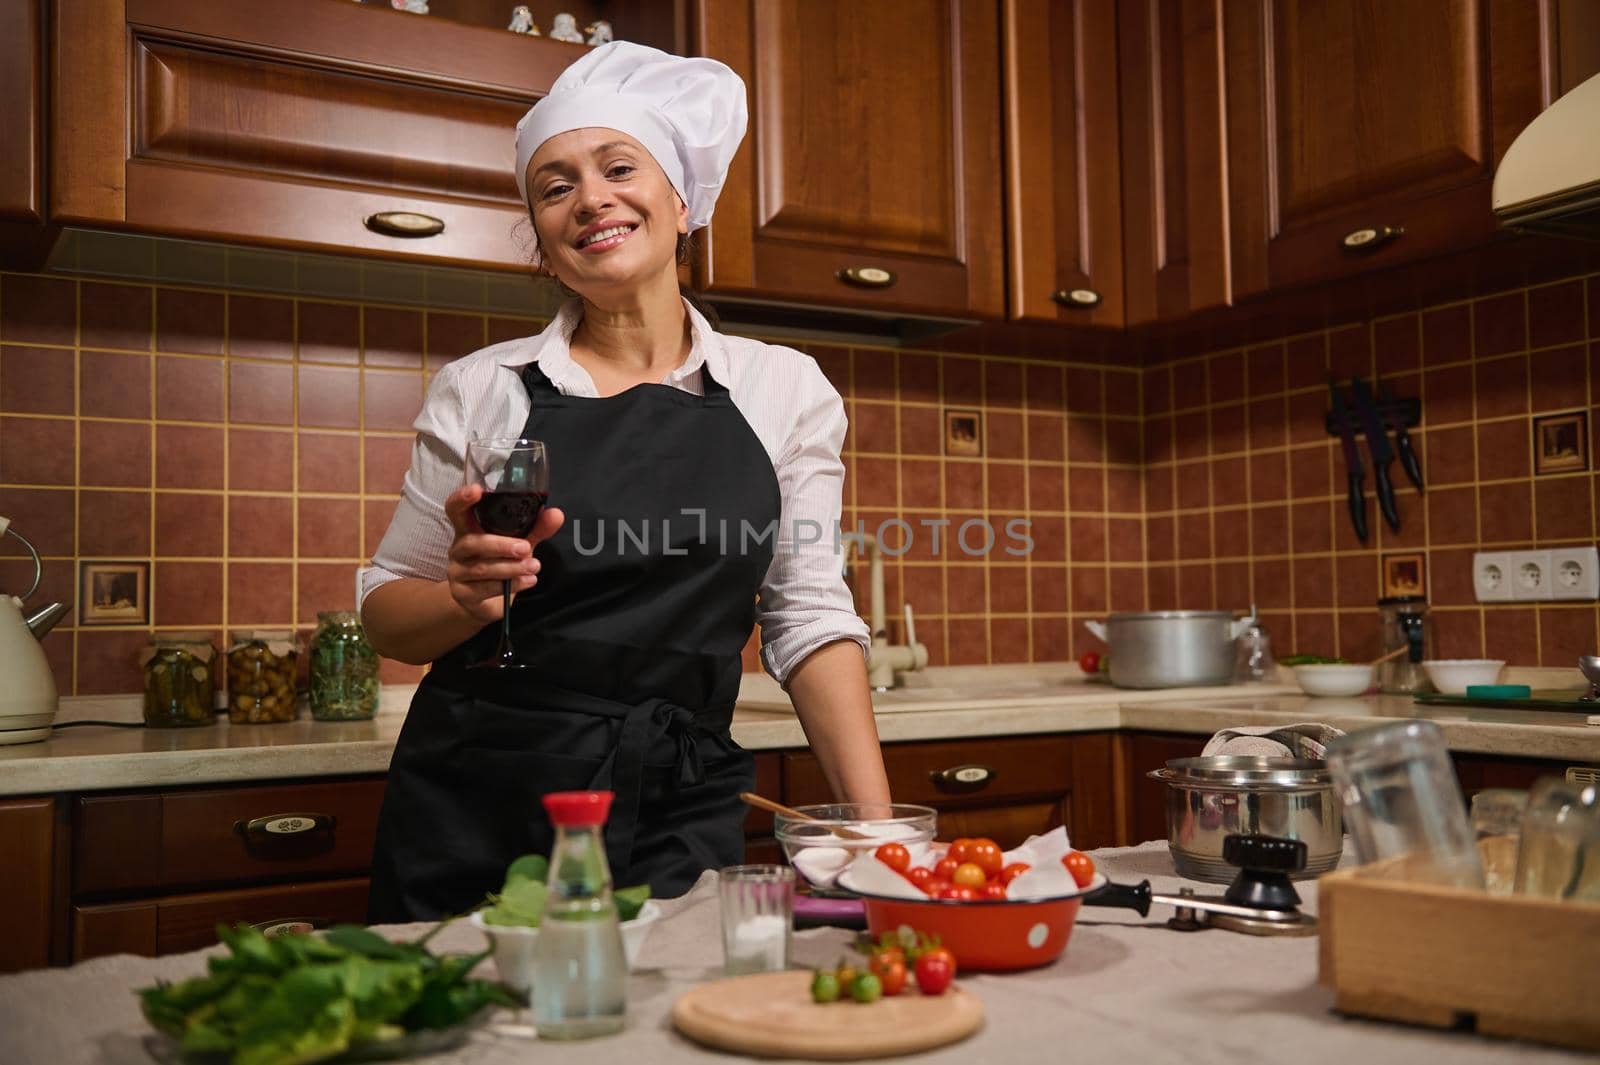 Charming woman, housewife in black apron and white chef's cap, sipping a glass of red wine while cooking at home kitchen by artgf